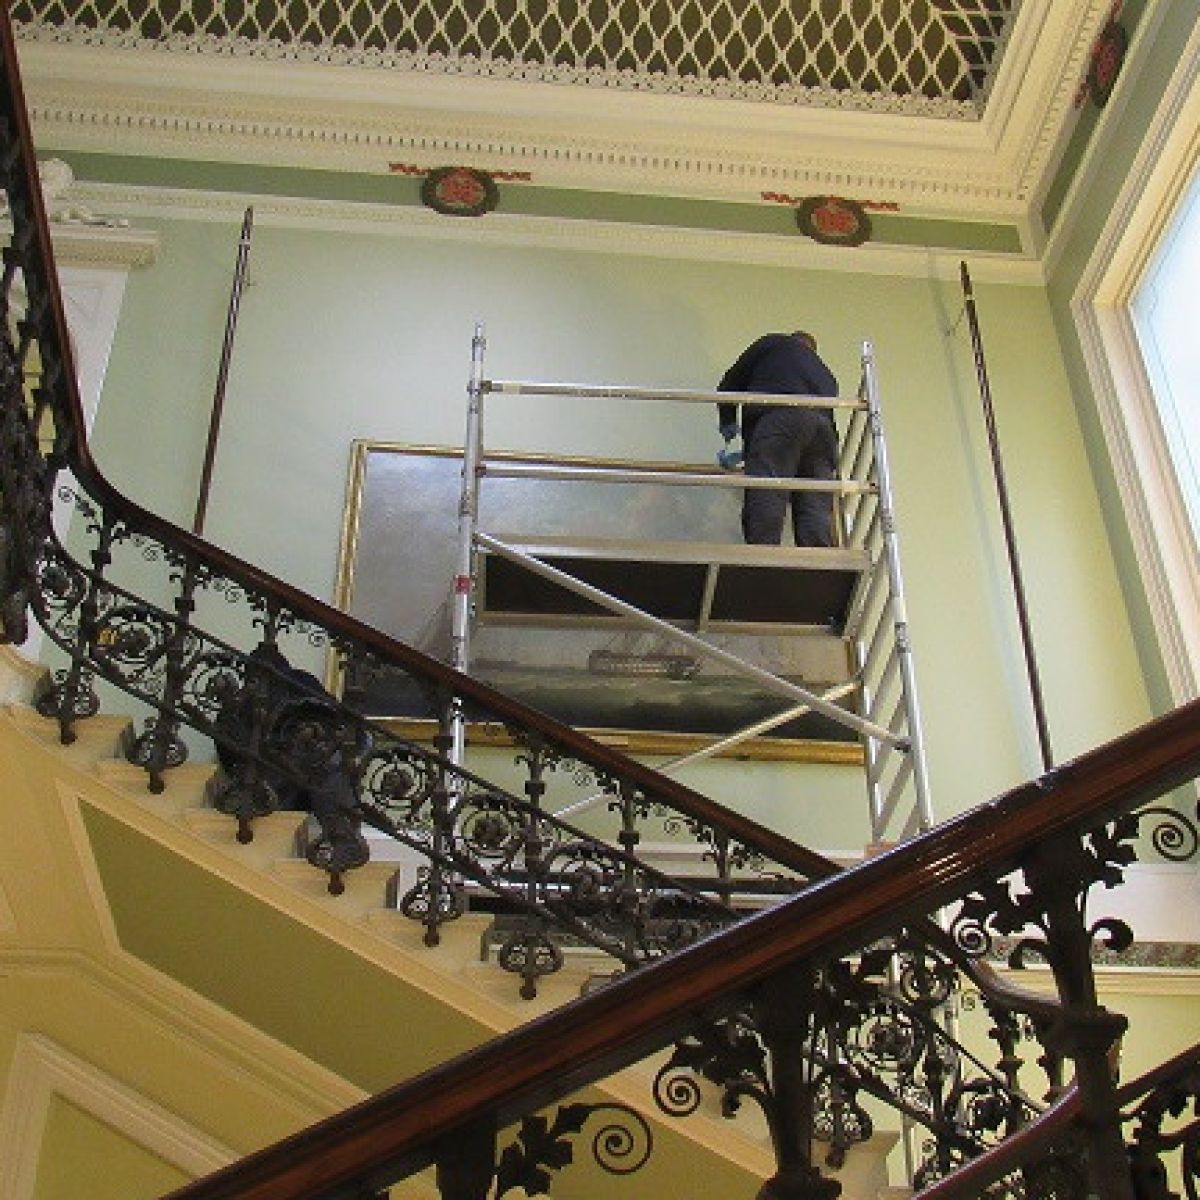 Technicians Start To Remove The Painting From The Stairwell Wall